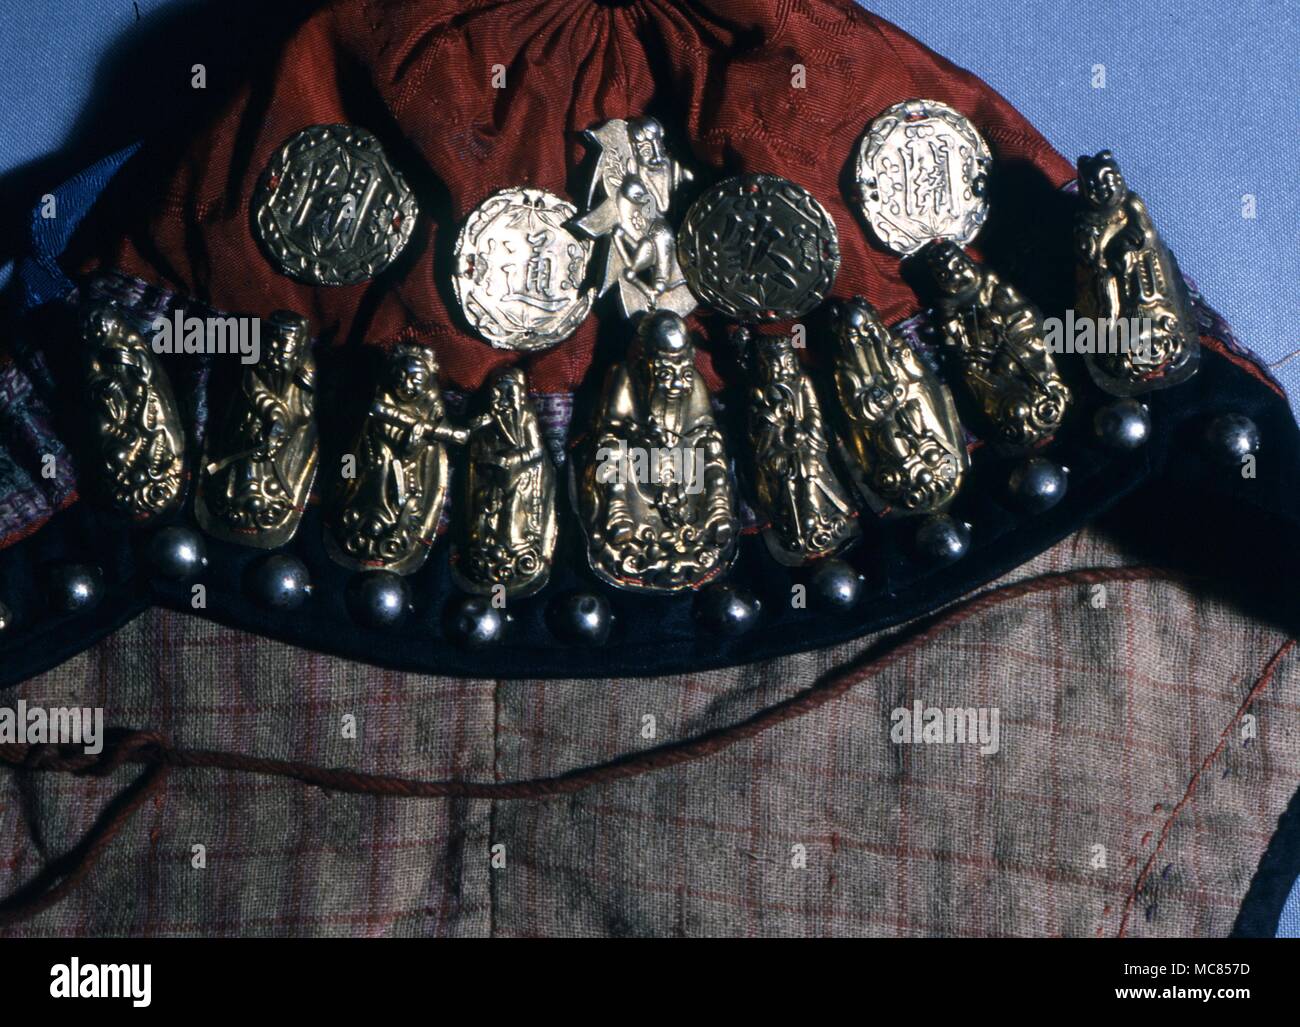 Amulet Crude metal images of the Eight chinese Immortals and amuletic coins, fixed on the front of a child's hat, from Northern China. Now in a private collection in Hong Kong. The amulets and immortals are used for protection Stock Photo